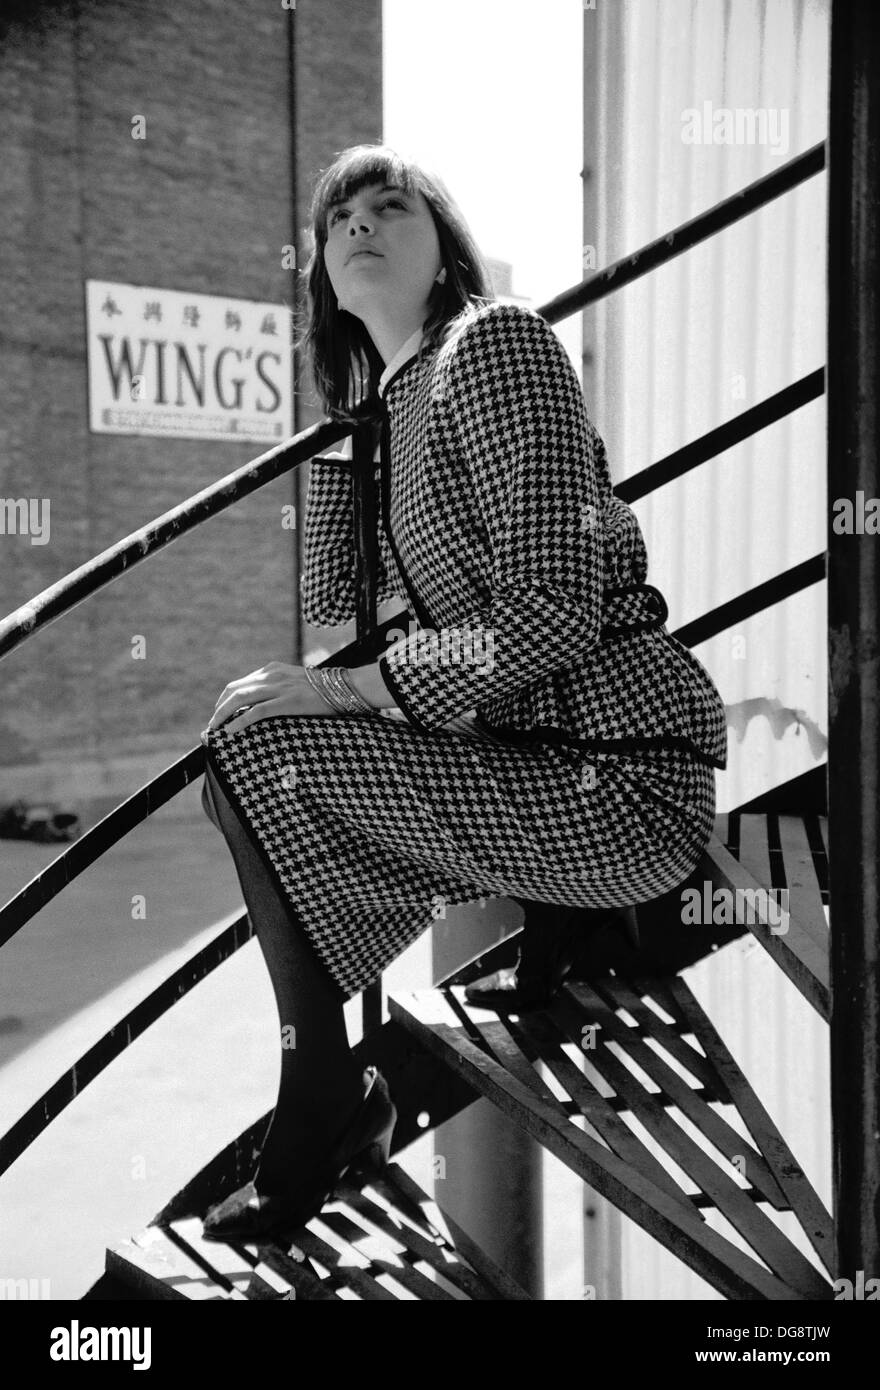 B&W fashion shot showing a young woman sitting in a spiral staircase. Stock Photo